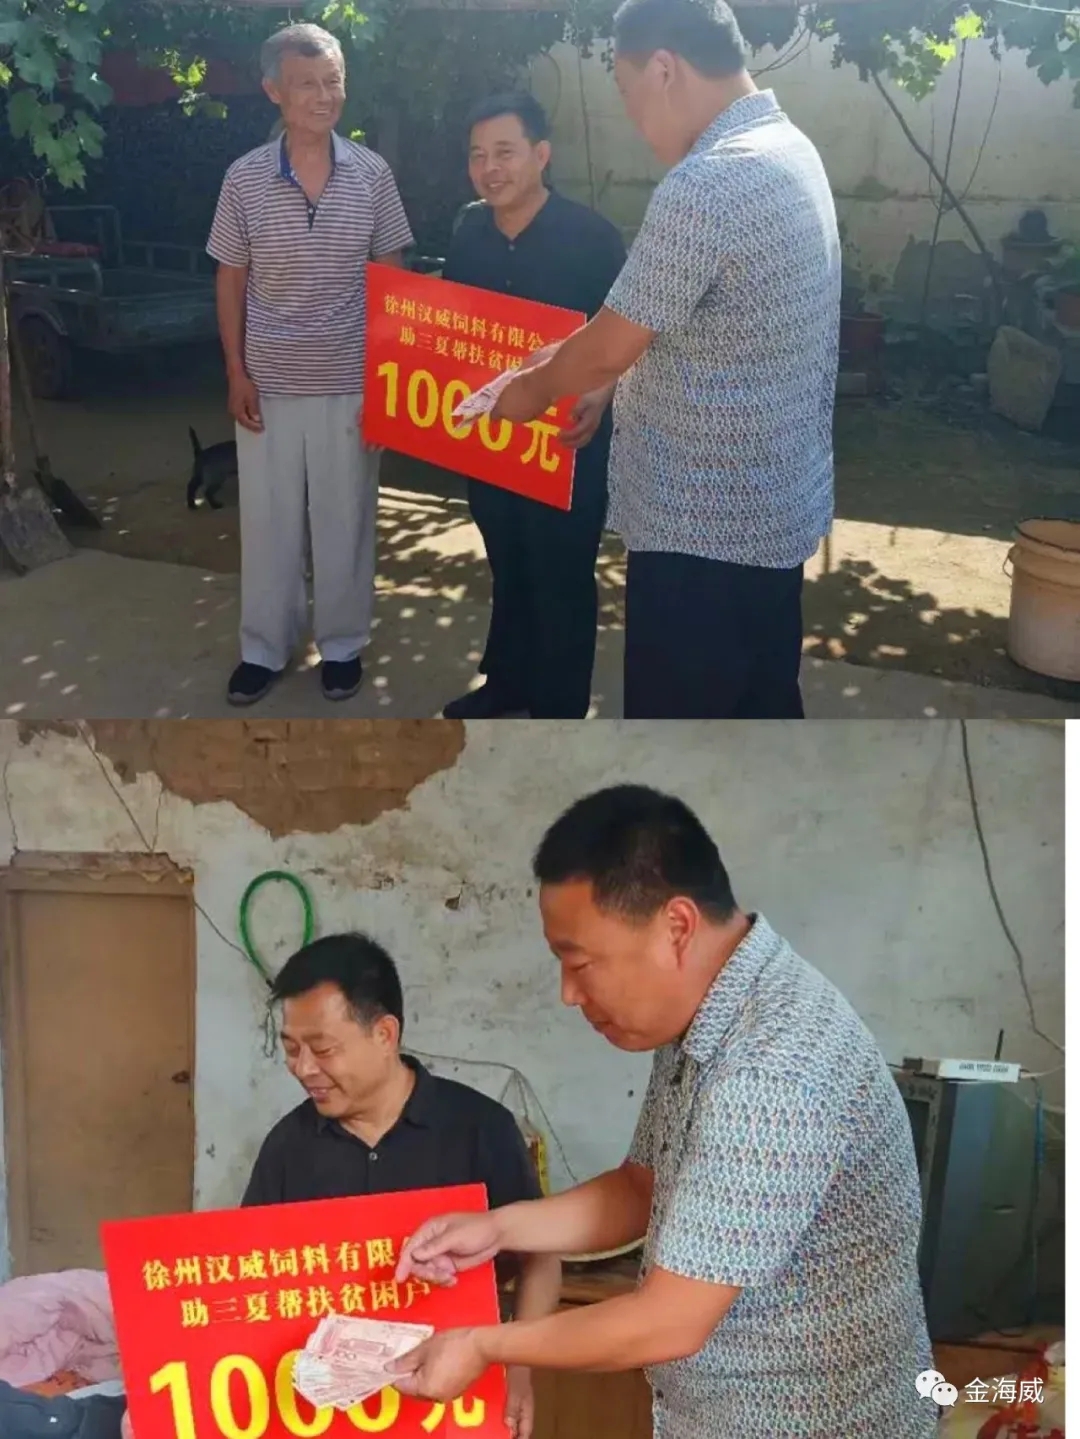 GHW's Xuzhou Havay Feed Co., Ltd. held an event in Songlou Town to help poor households